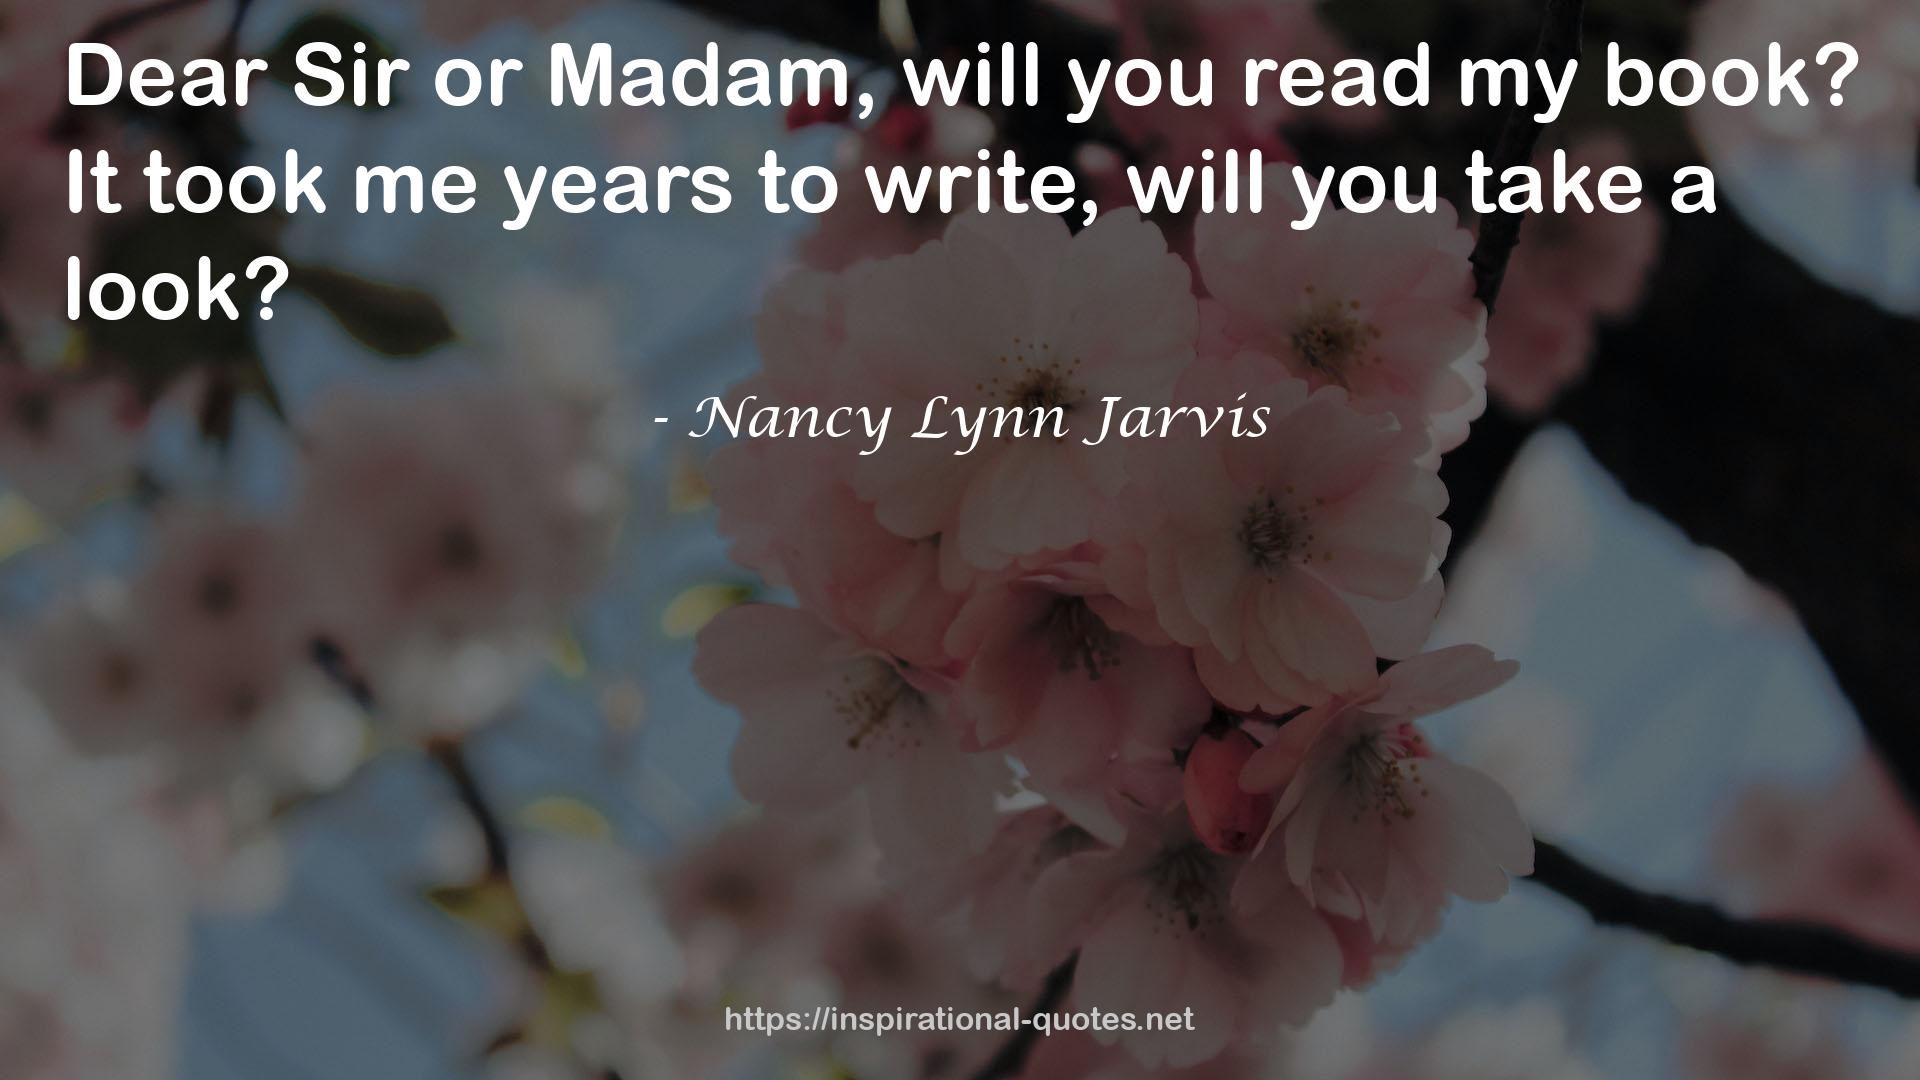 Nancy Lynn Jarvis QUOTES